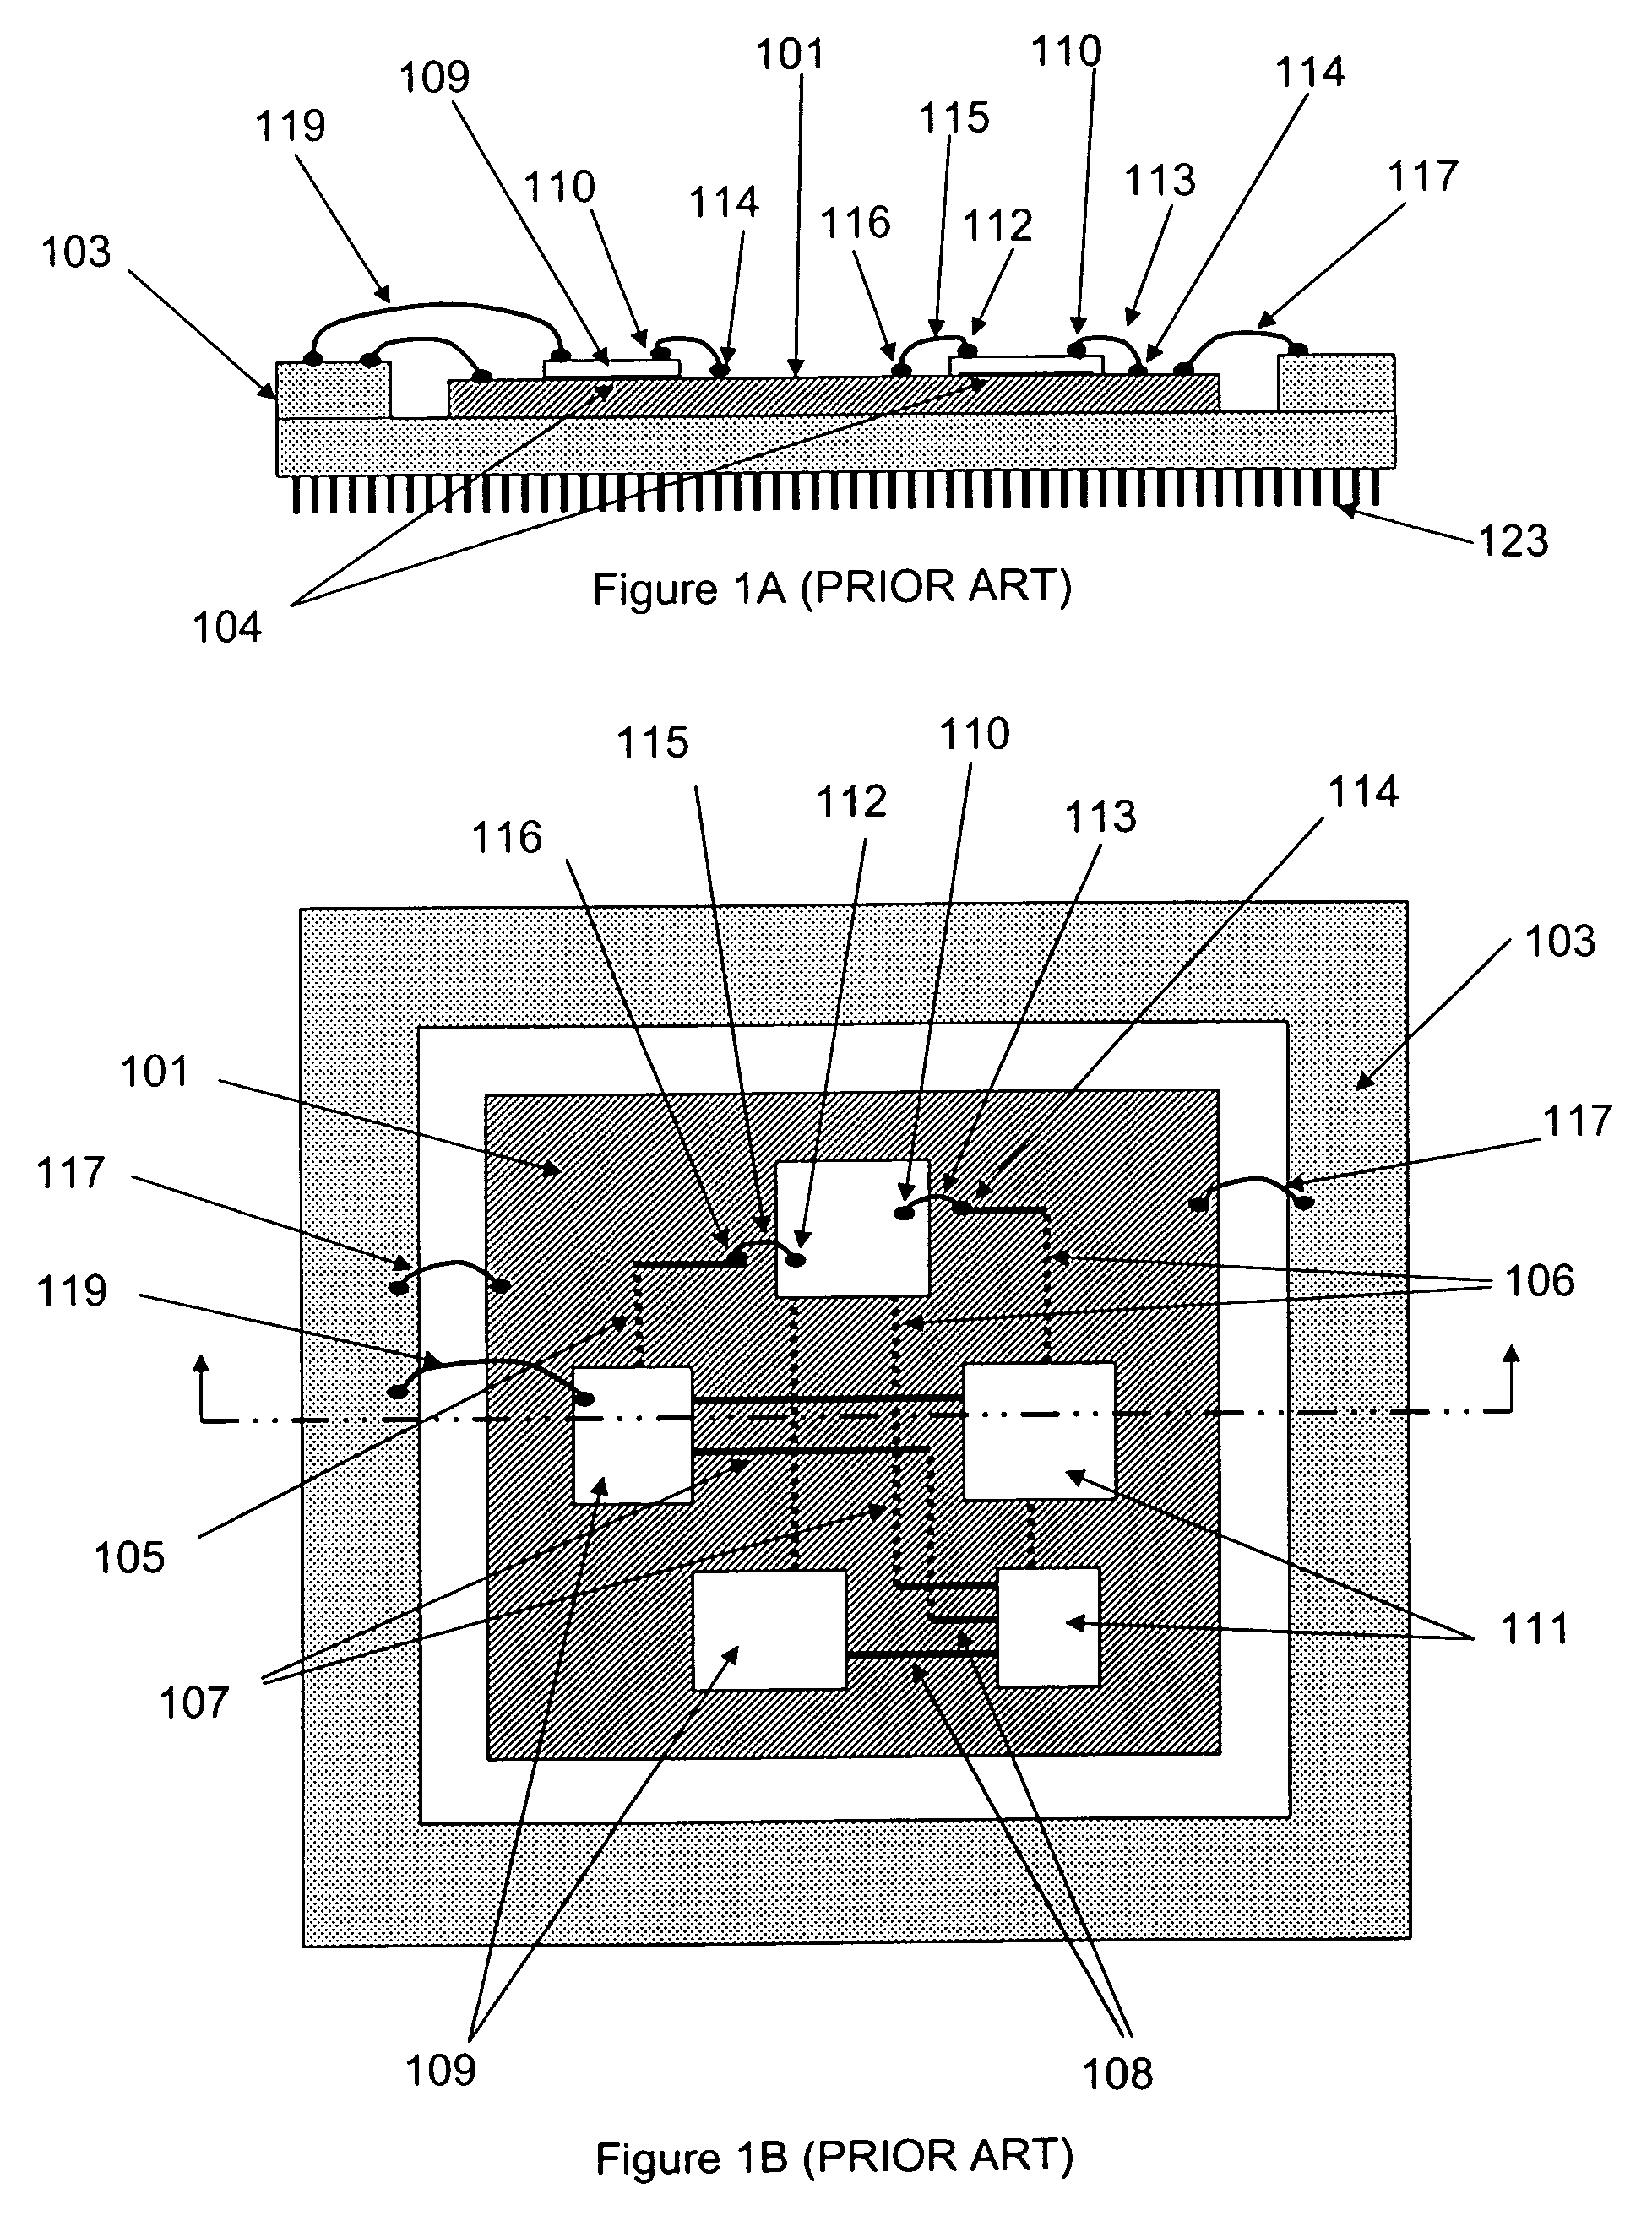 Hybrid semiconductor circuit with programmable intraconnectivity